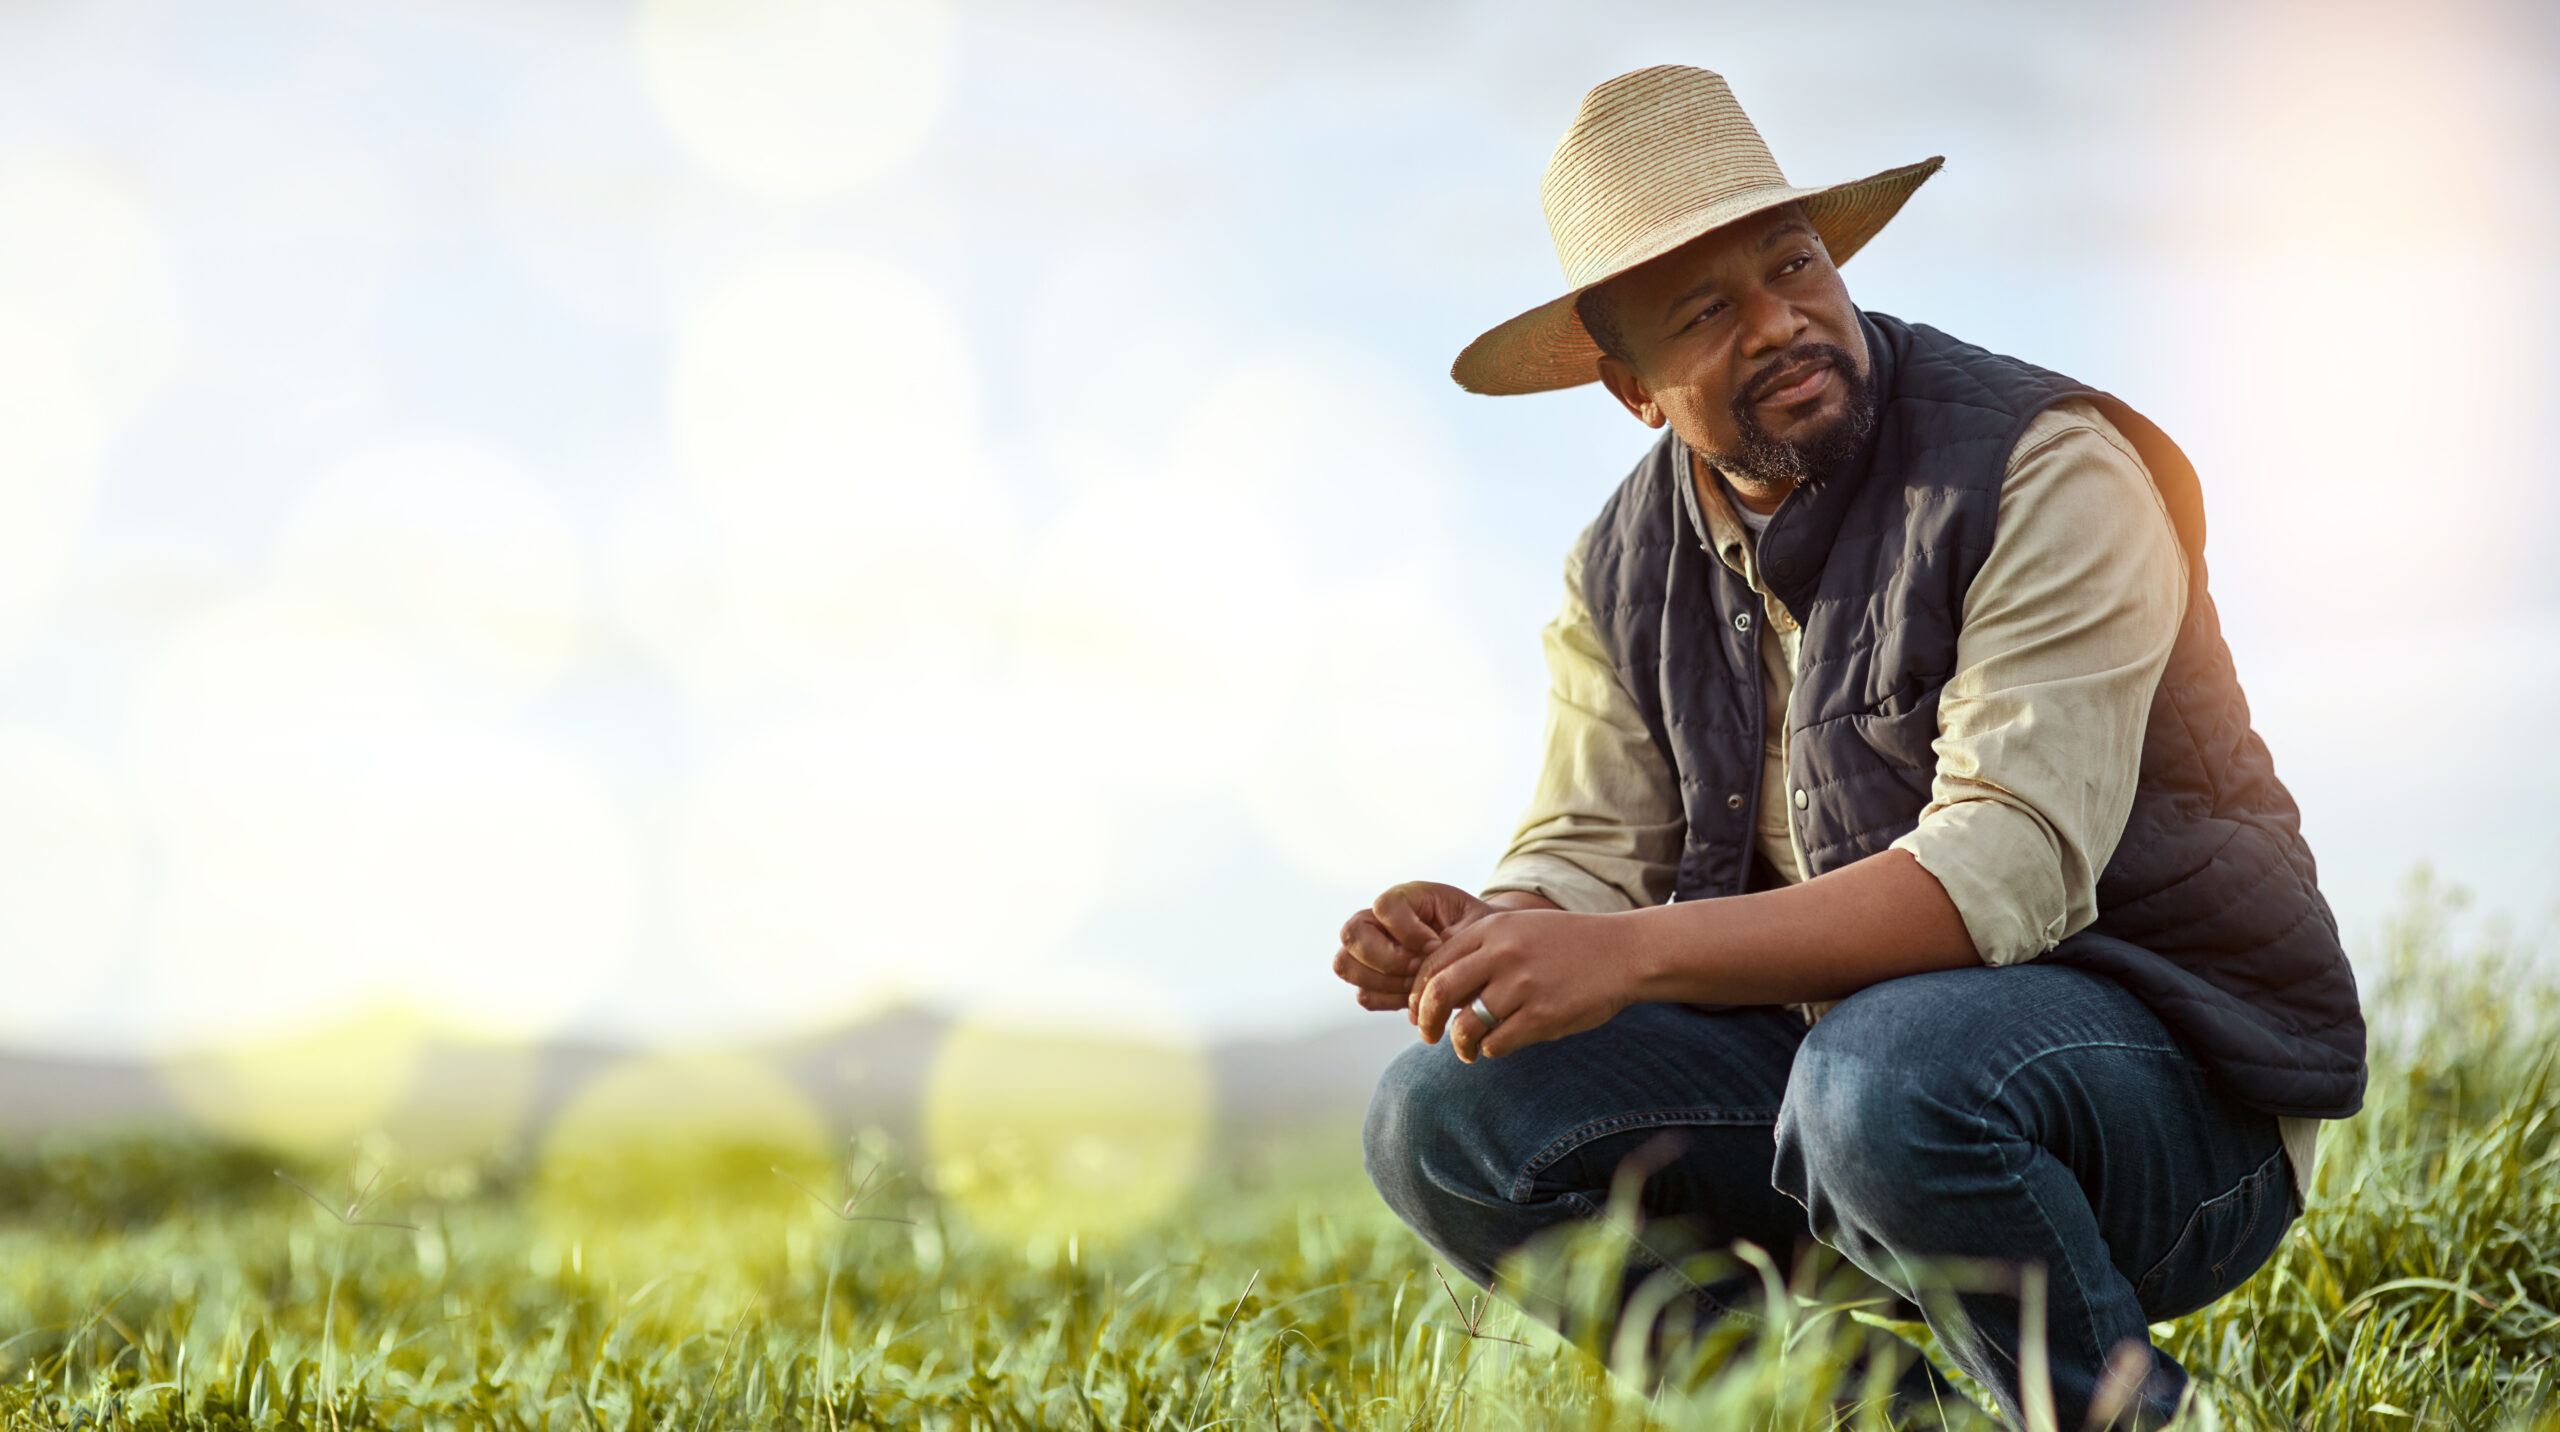 Farmer, black man and mockup for agriculture and sustainability outdoor on an agro farm with bokeh. Person on grass field thinking about farming innovation, growth and ecology in the countryside.